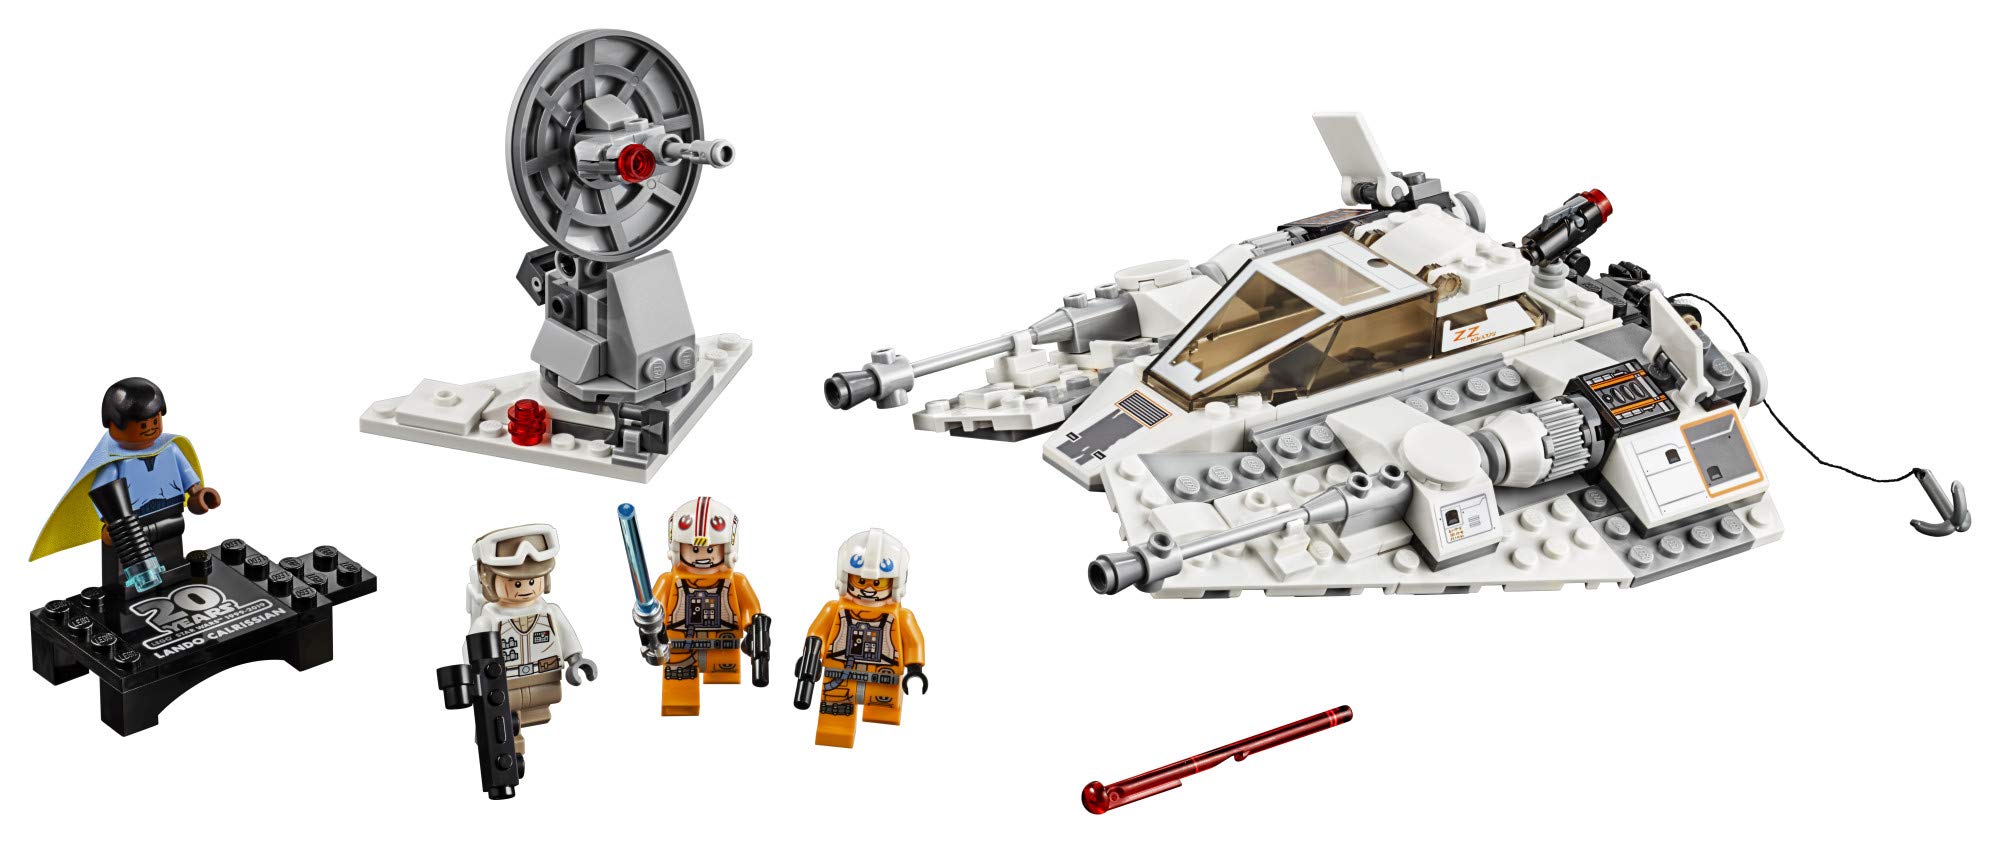 LEGO Star Wars: The Empire Strikes Back Snowspeeder â€“ 20th Anniversary Edition 75259 Building Kit (309 Pieces) (Discontinued by Manufacturer)